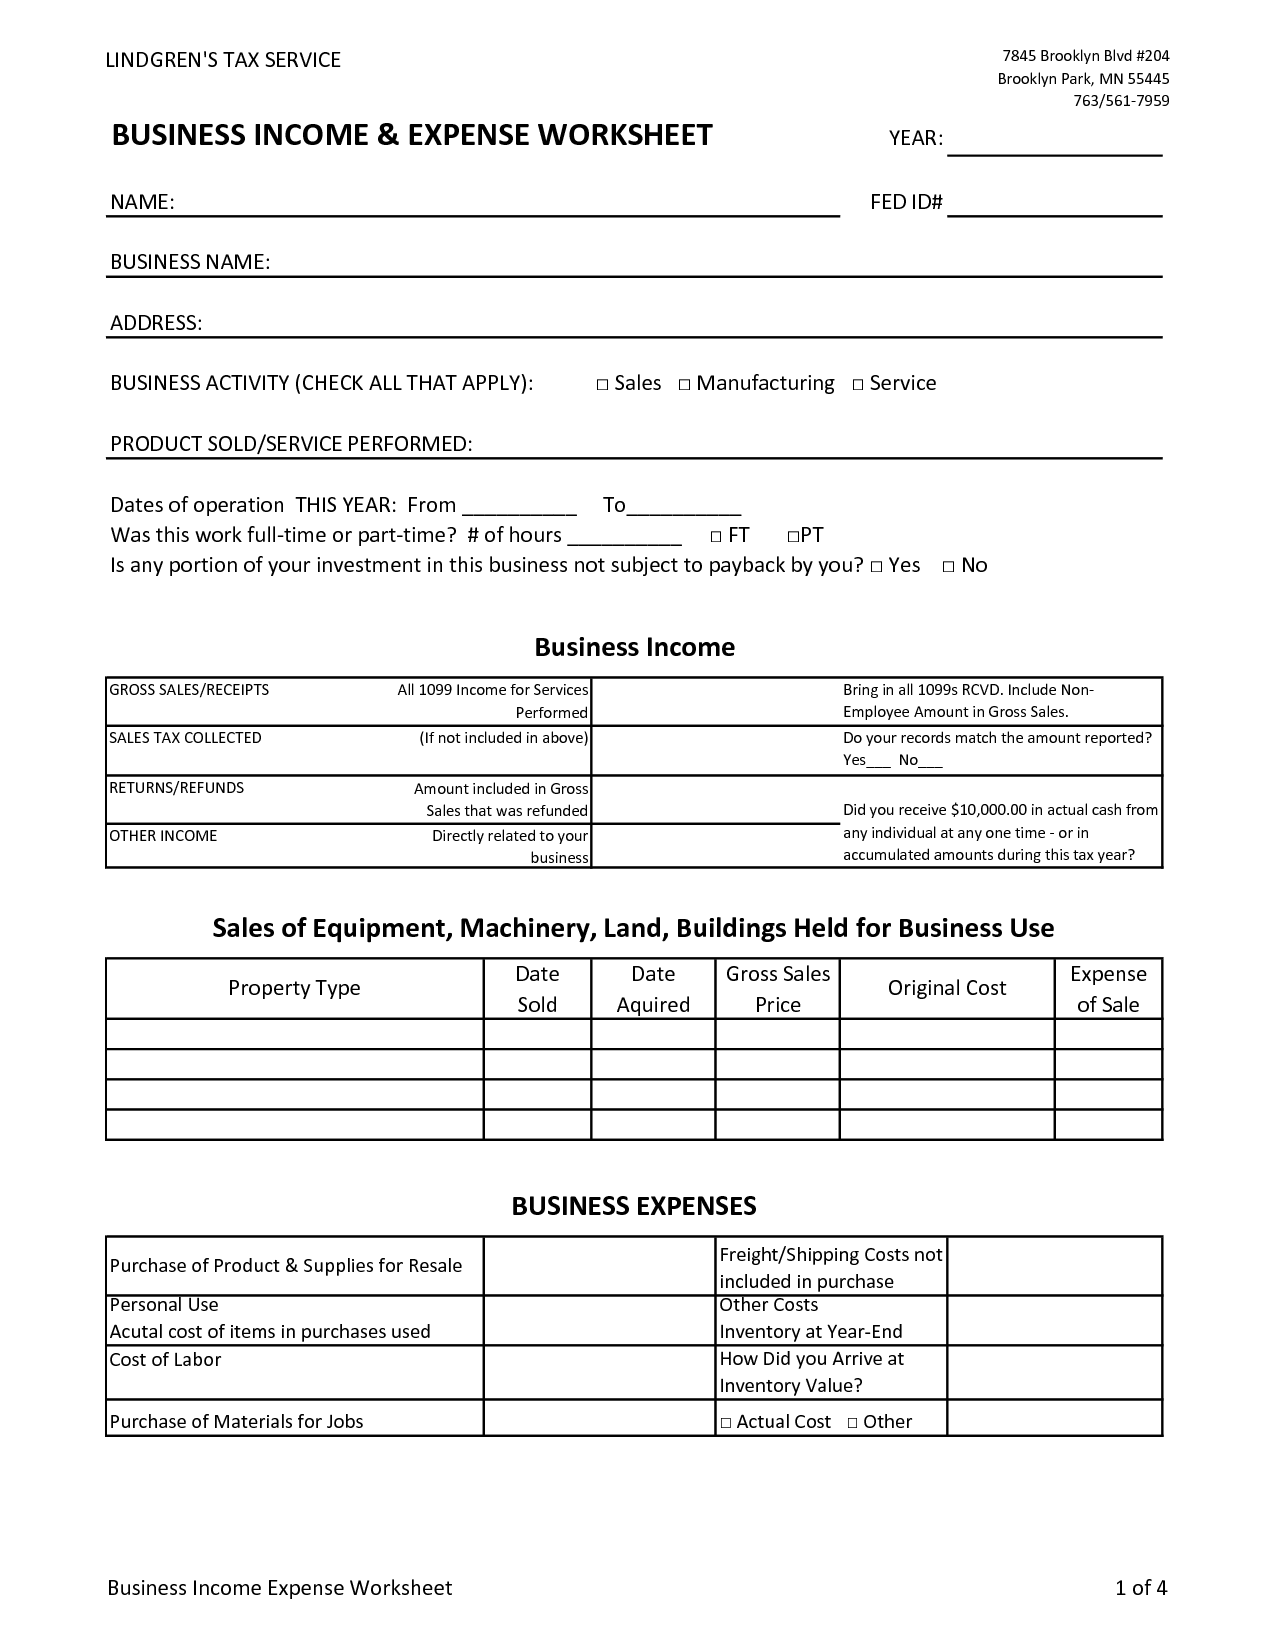 Business Income and Expense Worksheet